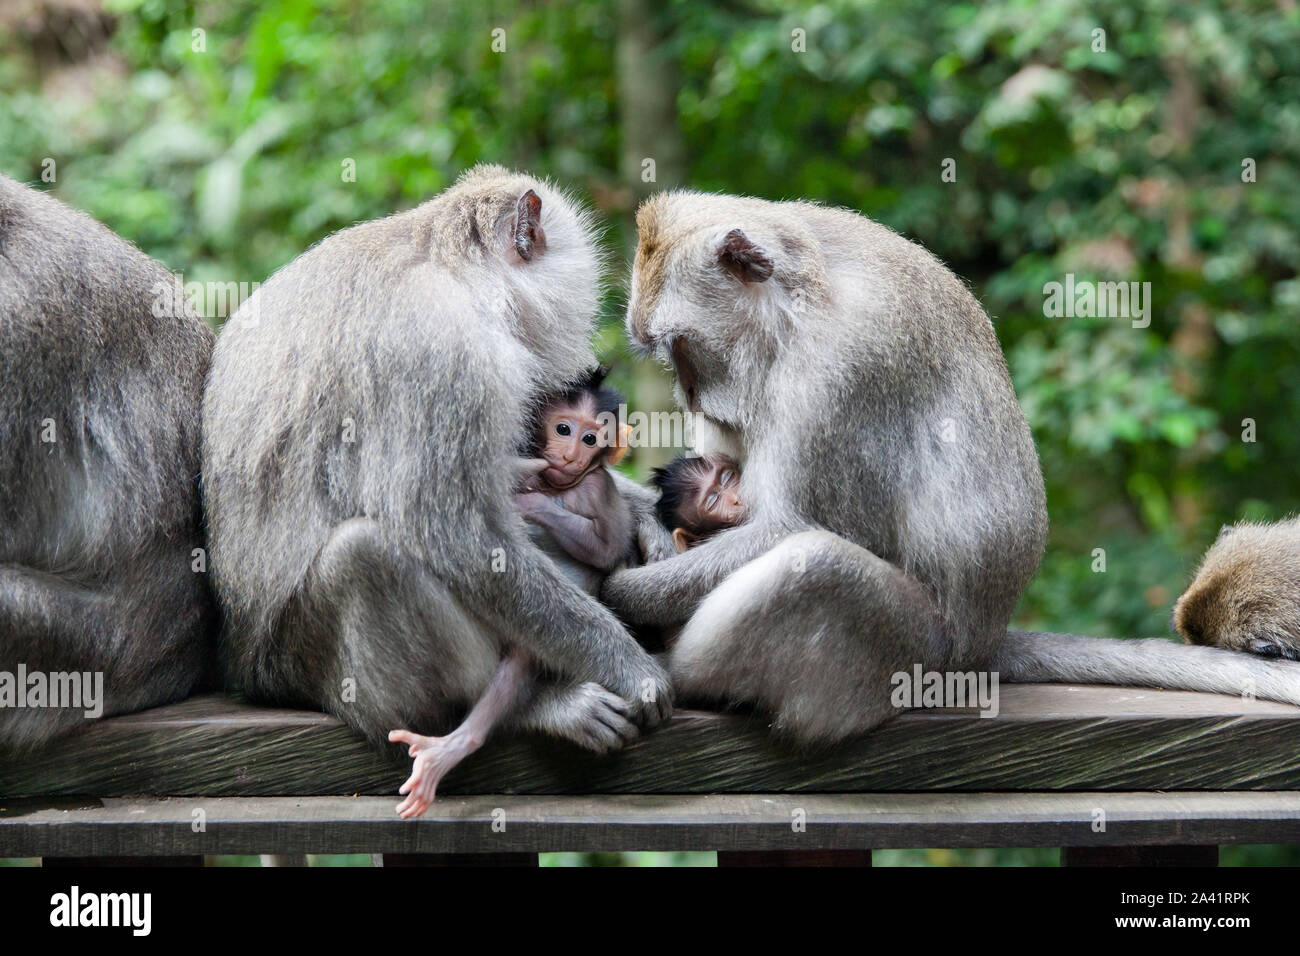 Monkey family. Monkey mothers and their cubs sit together. monkey family at sacred monkey forest Ubud Bali Indonesia. Stock Photo